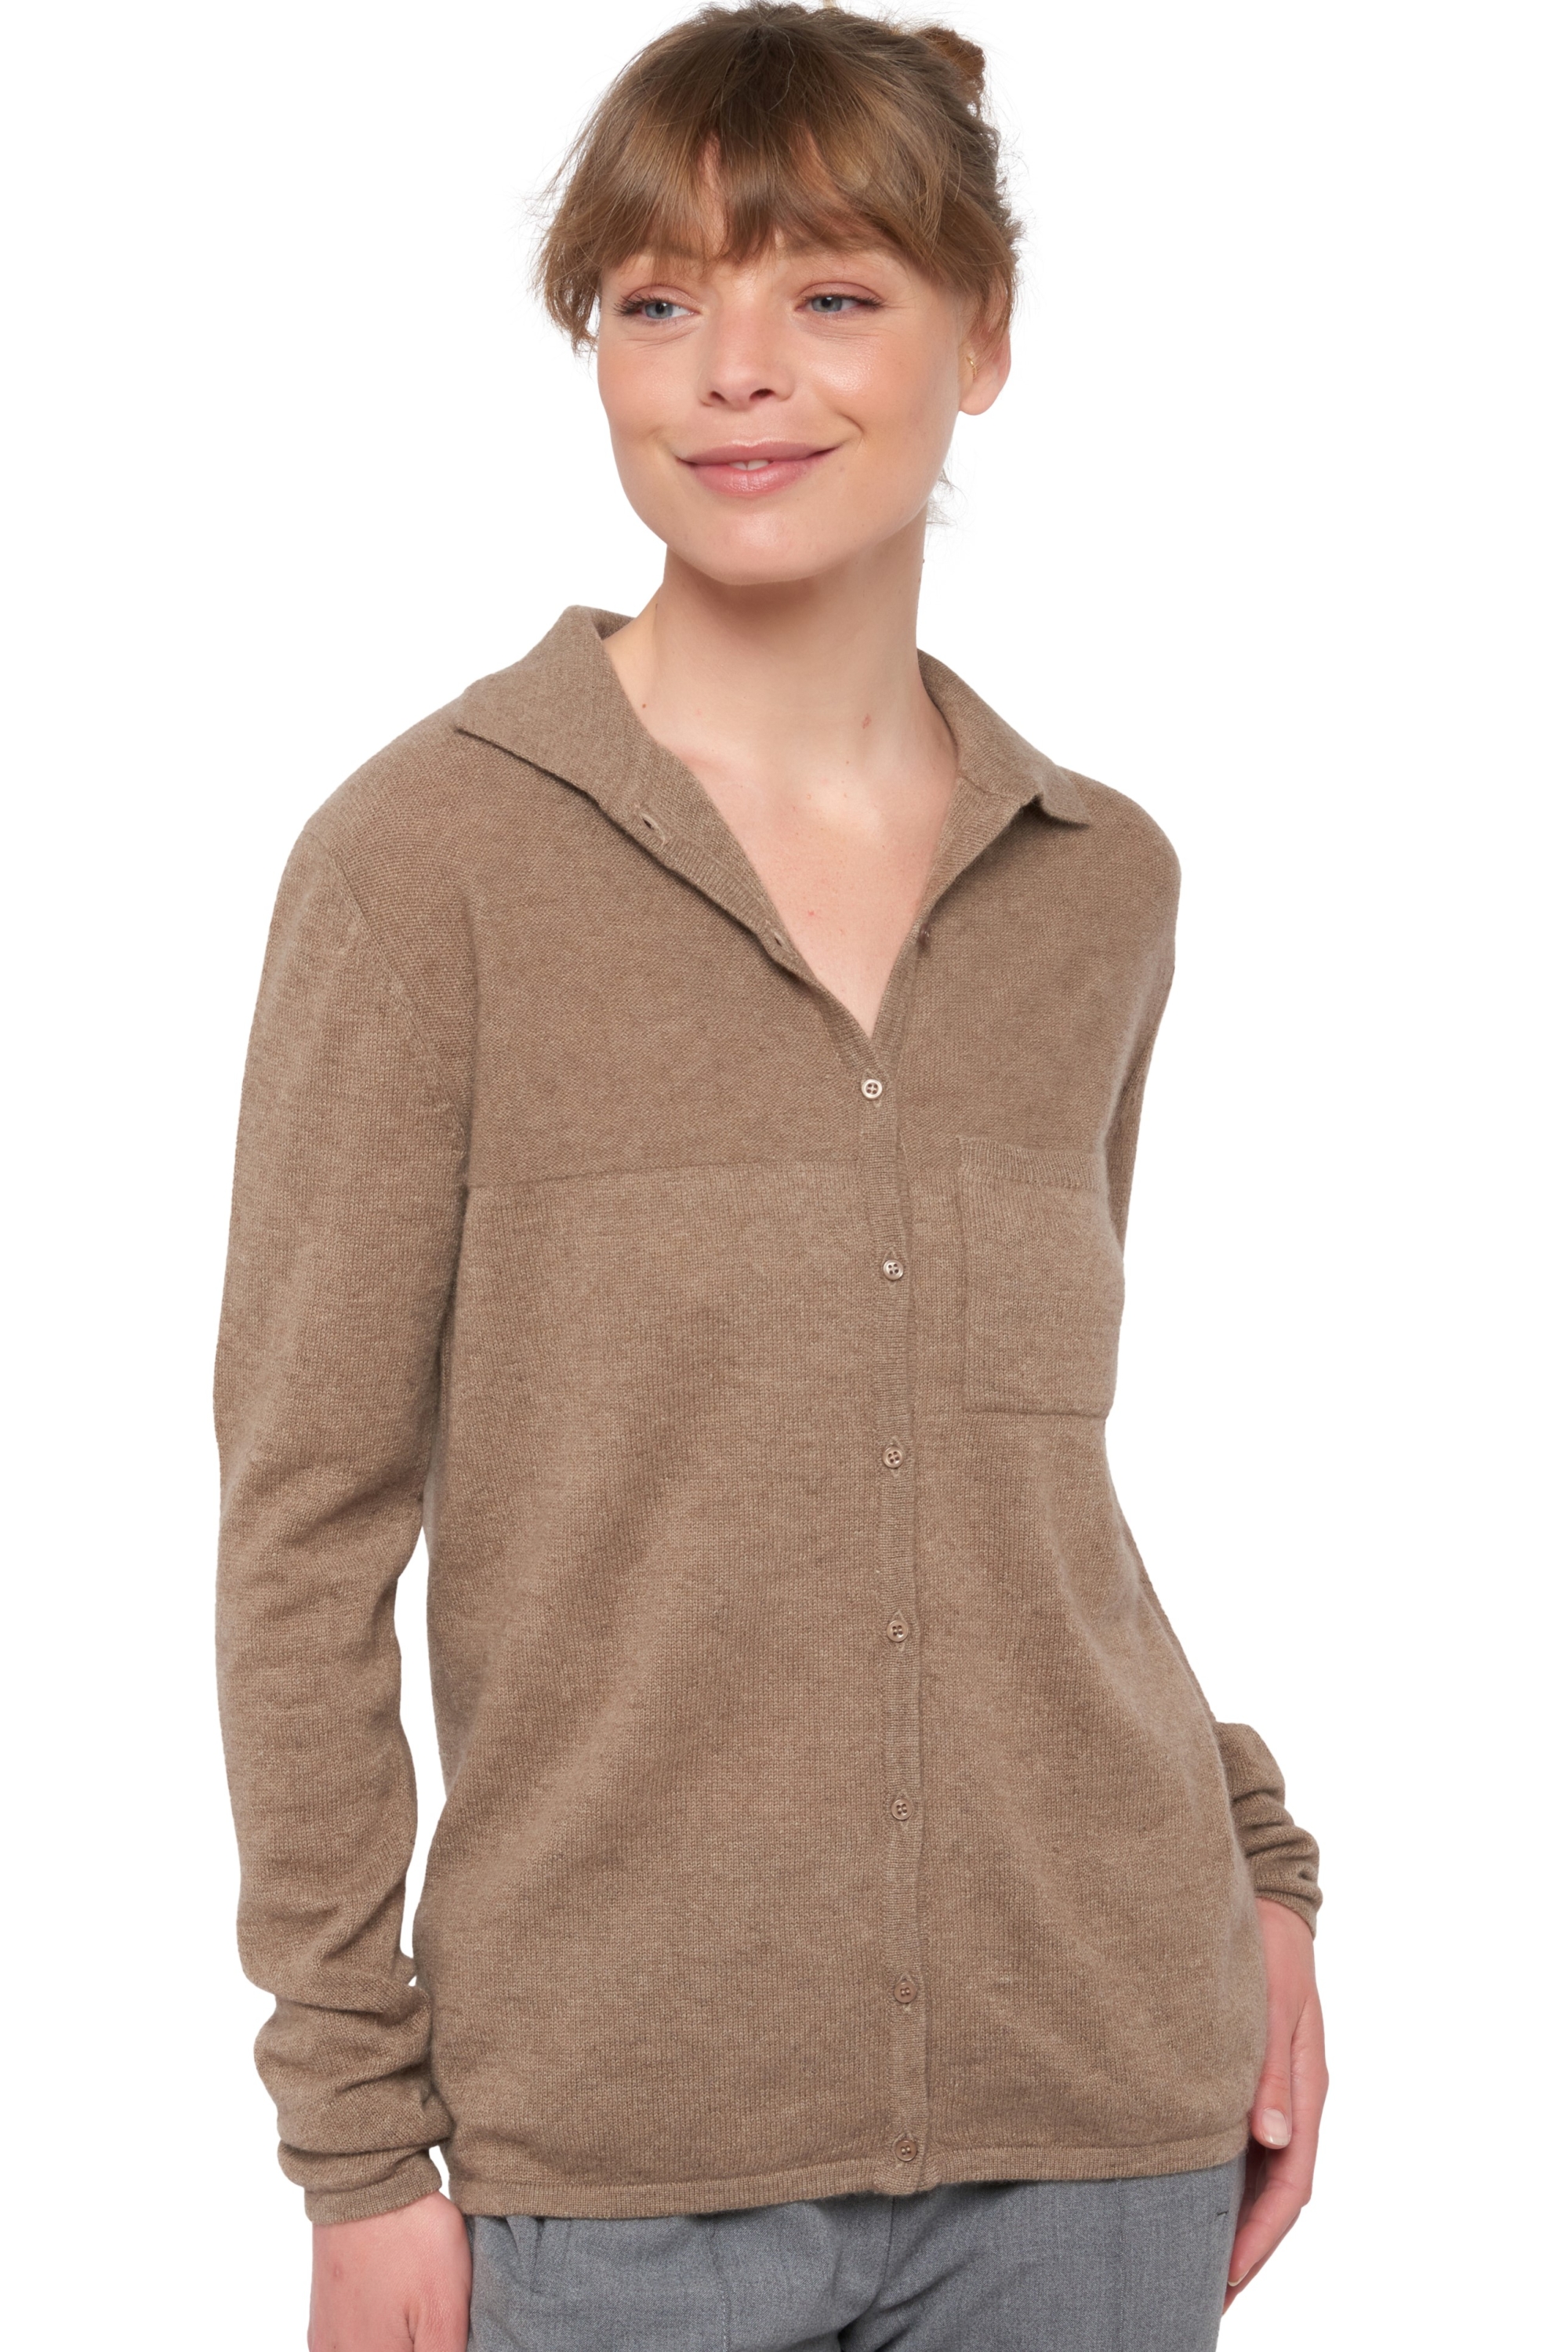 Cachemire pull femme col v umea natural brown xs